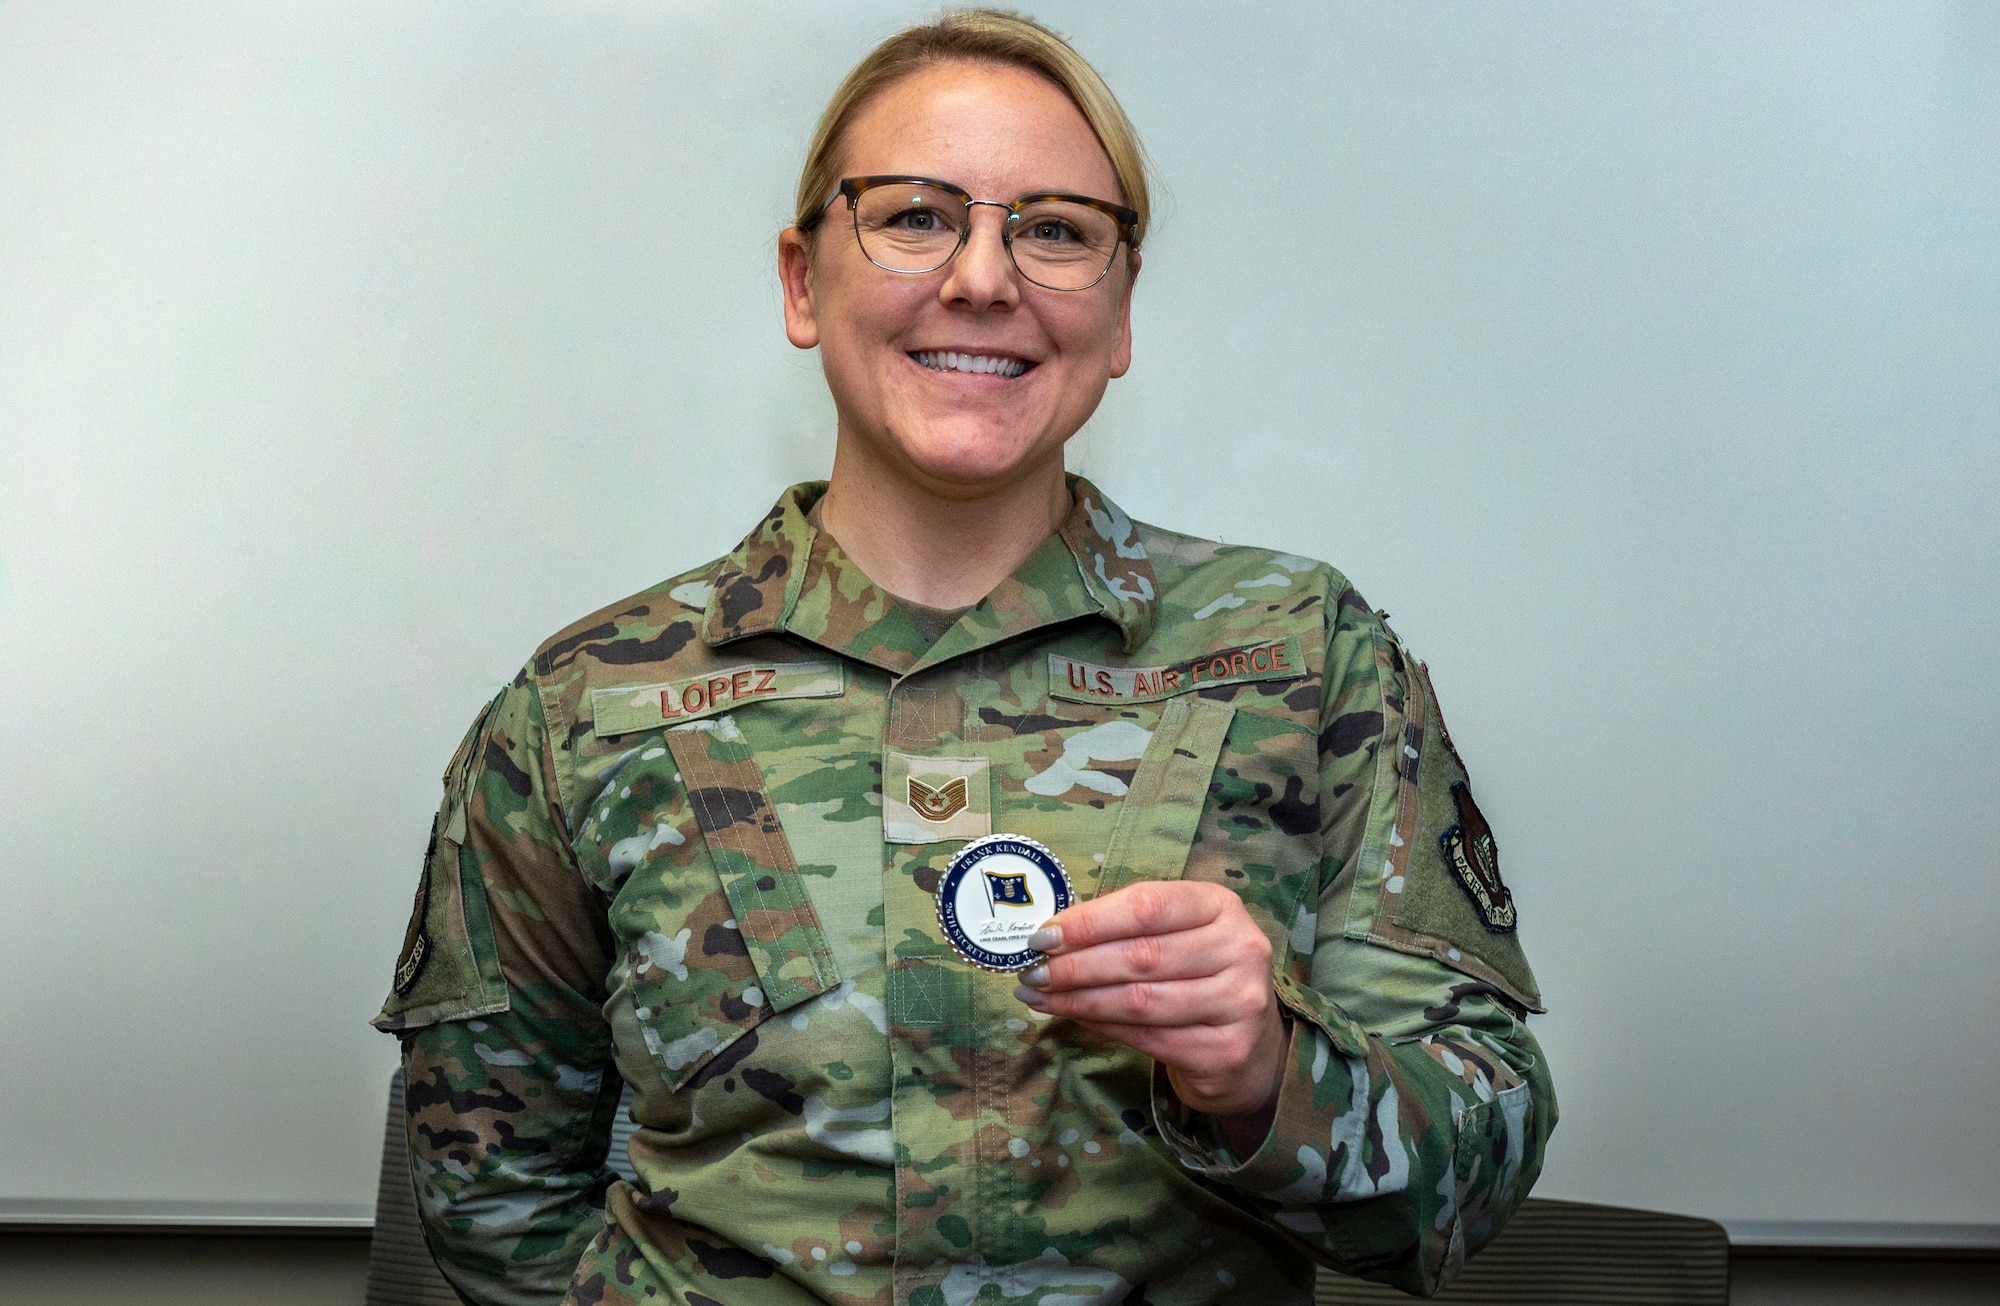 U.S. Air Force Tech. Sgt. Brooke Lopez, 25th Fighter Generation Squadron expeditor, displays her coin presented by Secretary of the Air Force Frank Kendall at Osan Air Base, Republic of Korea, March 20, 2023.